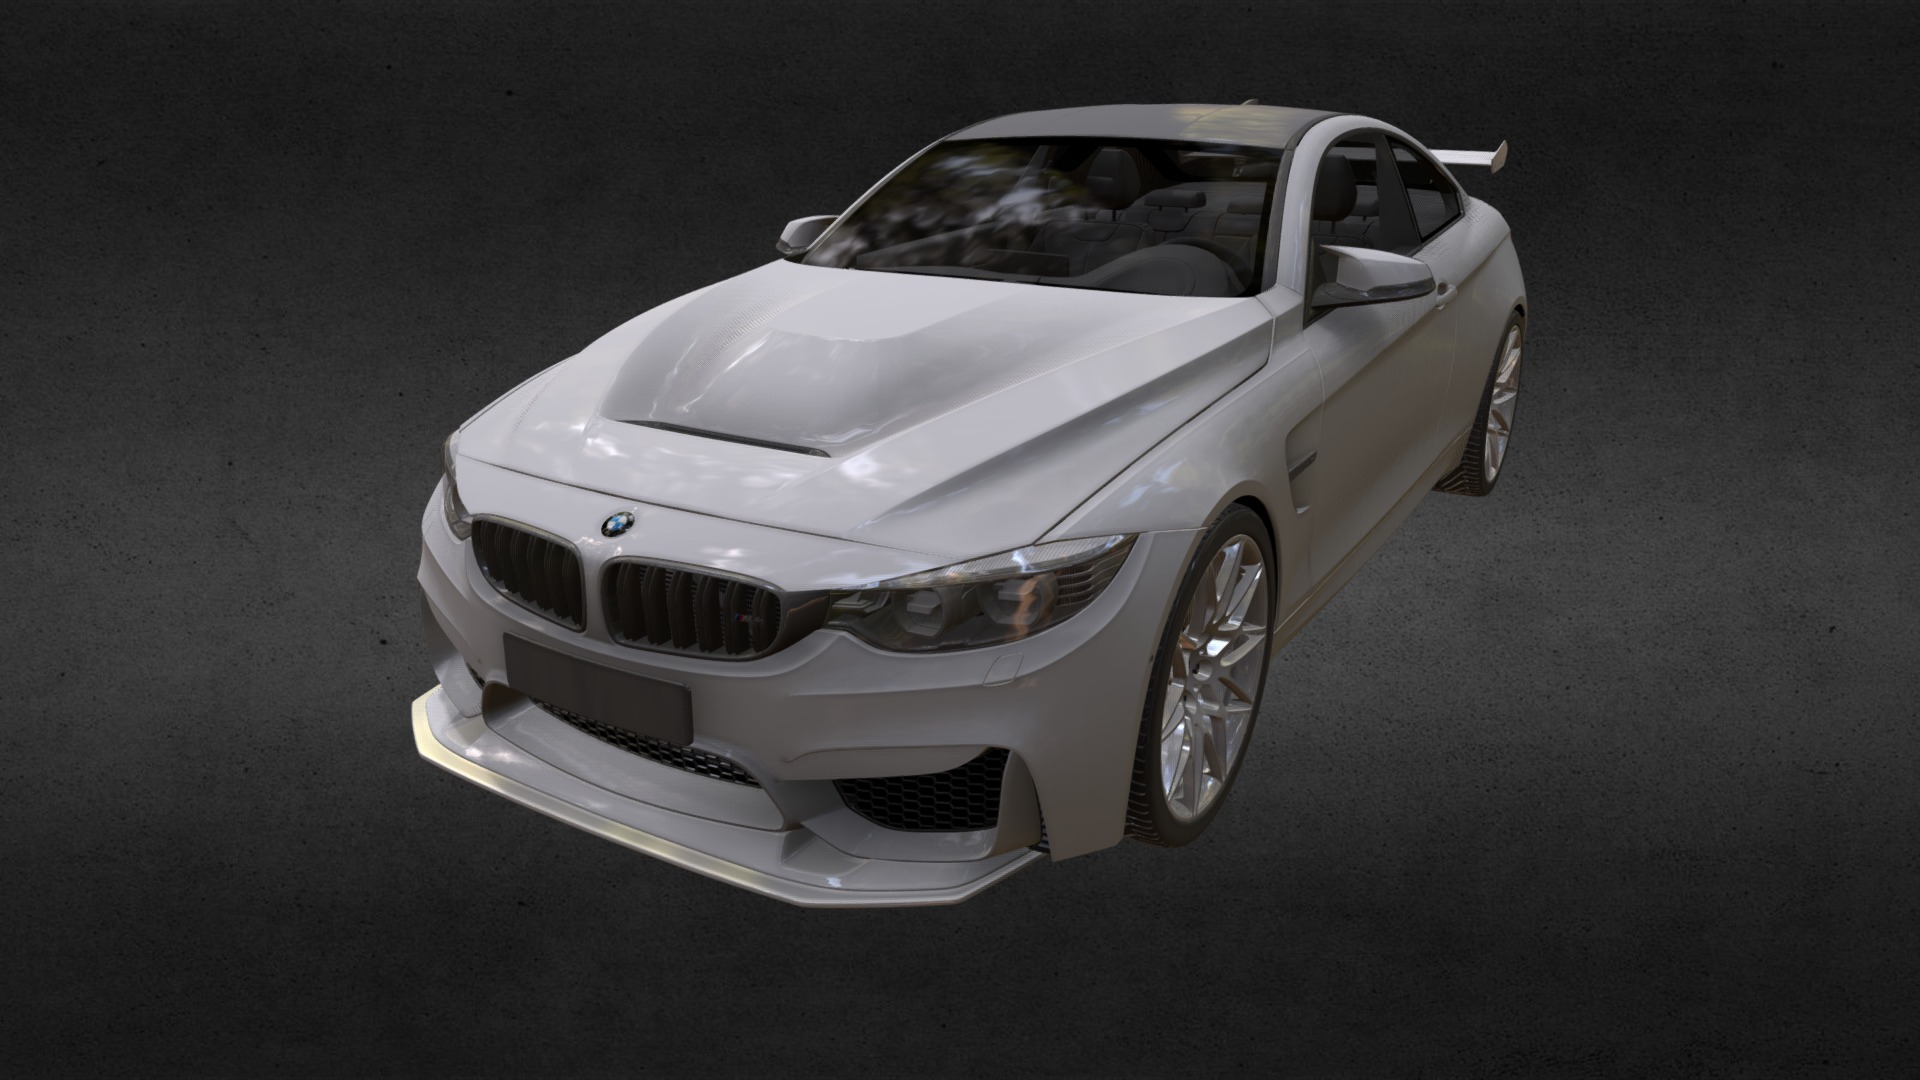 BMW M4 3D model
Features: 
- High quality polygonal model - correctly scaled accurate representation of the original objects. 
- Model resolutions are optimized for polygon efficiency (in 3DS MAX the meshsmooth function can be used to increase mesh resolution if necessary). 
- All colors can be easily modified. 
- Model is fully textured with all materials applied. 
- All textures and materials are included and mapped in every format. 
- Max models grouped for easy selection &amp; objects are logically named for ease of scene management. 
- No part-name confusion when importing several models into a scene. 
- No cleaning up necessary, just drop your models into the scene and start rendering. 
- No special plugin needed to open scene 3d model